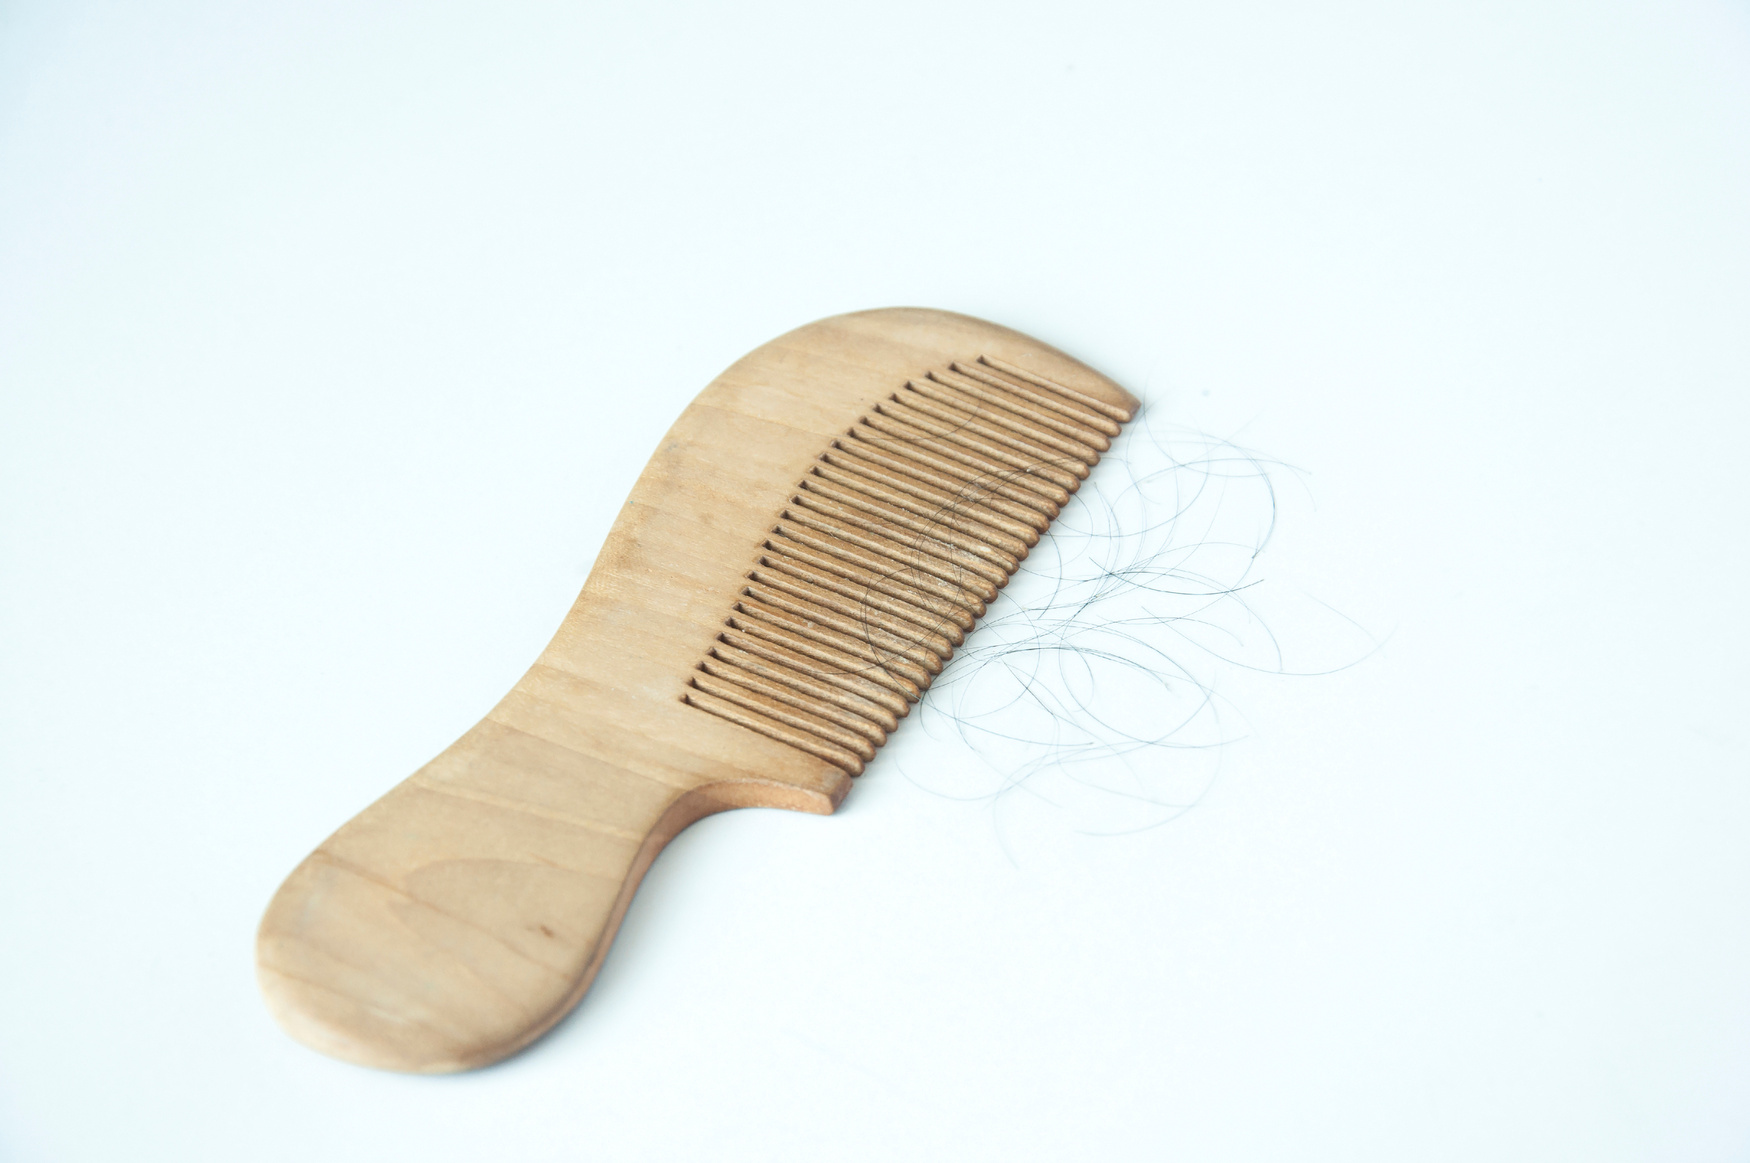 Comb and hair loss on white background